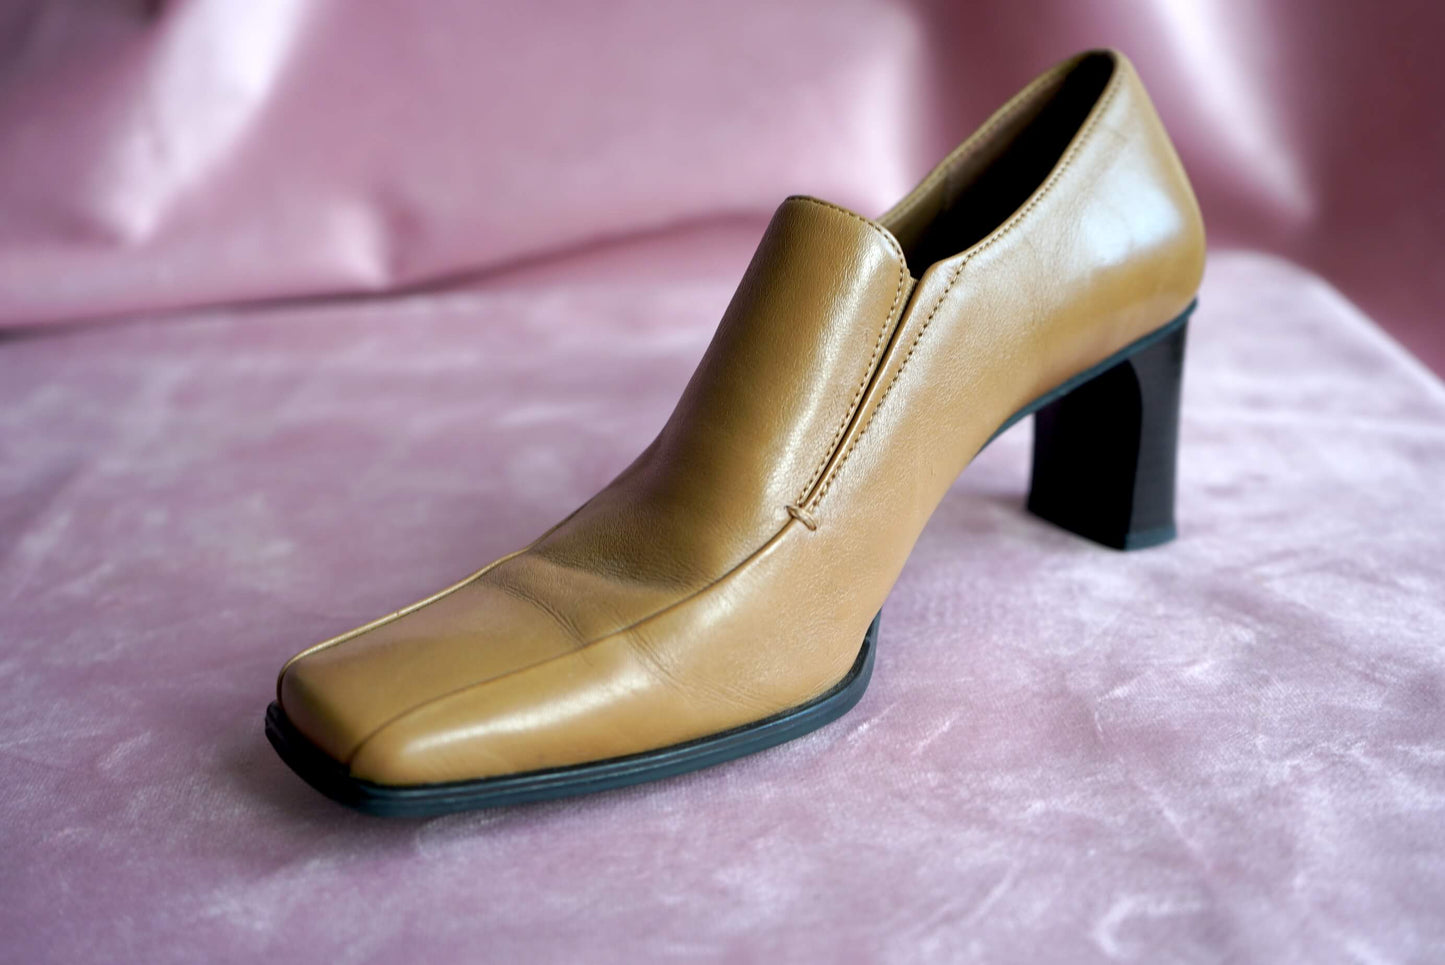 Vintage Tanned Square-Toed Leather Heeled Shoes Size 4